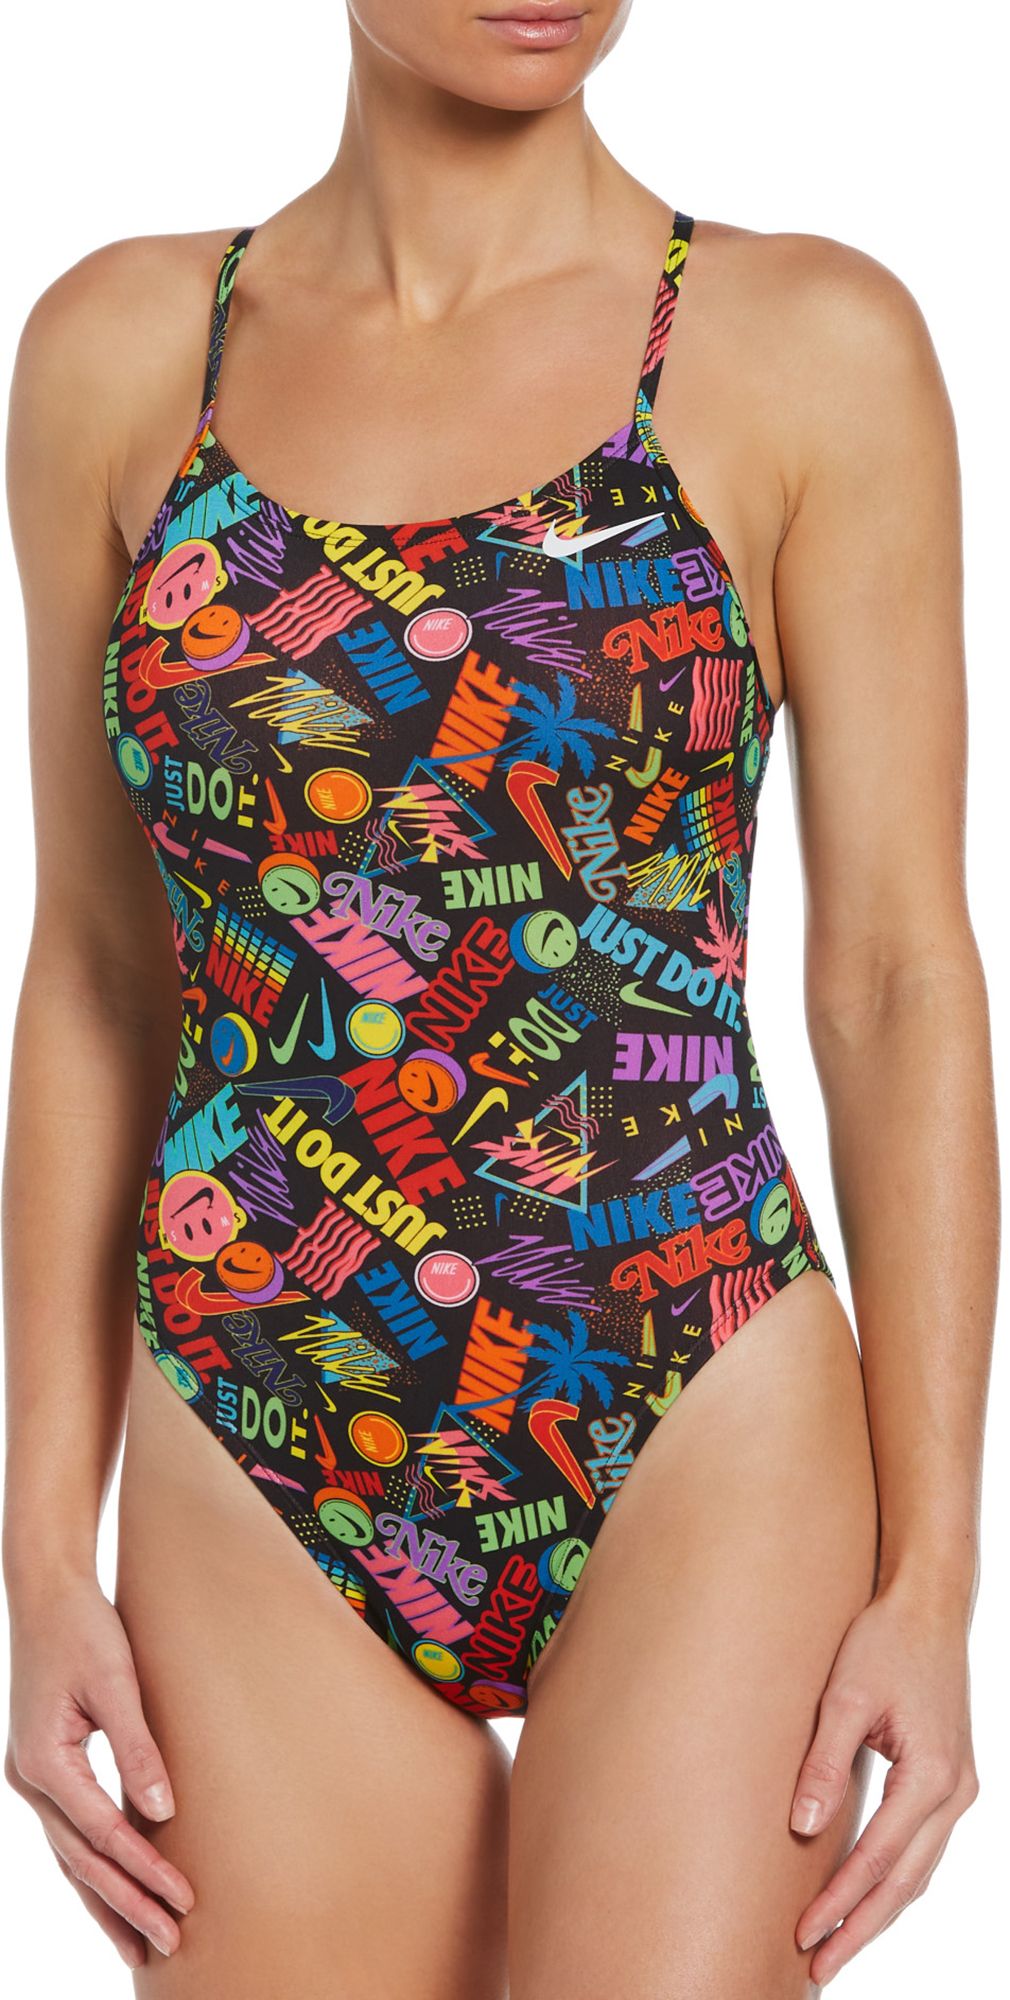 Onnodig Ontslag Controverse Nike / Women's Hydrastrong Lace Up Tie-Back One Piece Swimsuit